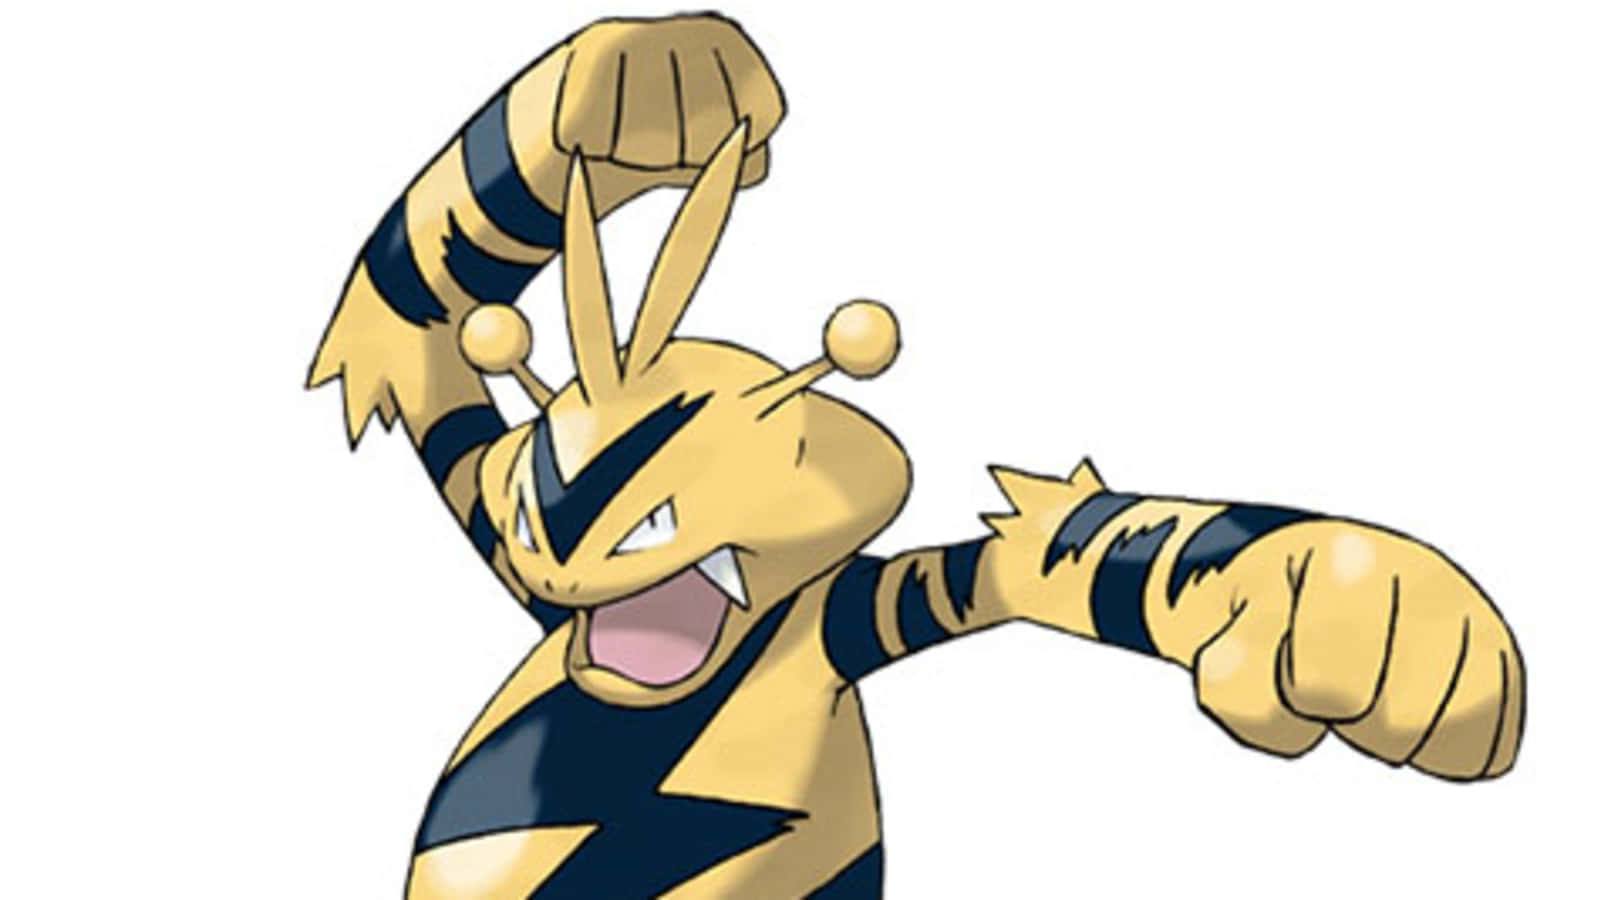 Electrifying Force - Electabuzz in Action Wallpaper